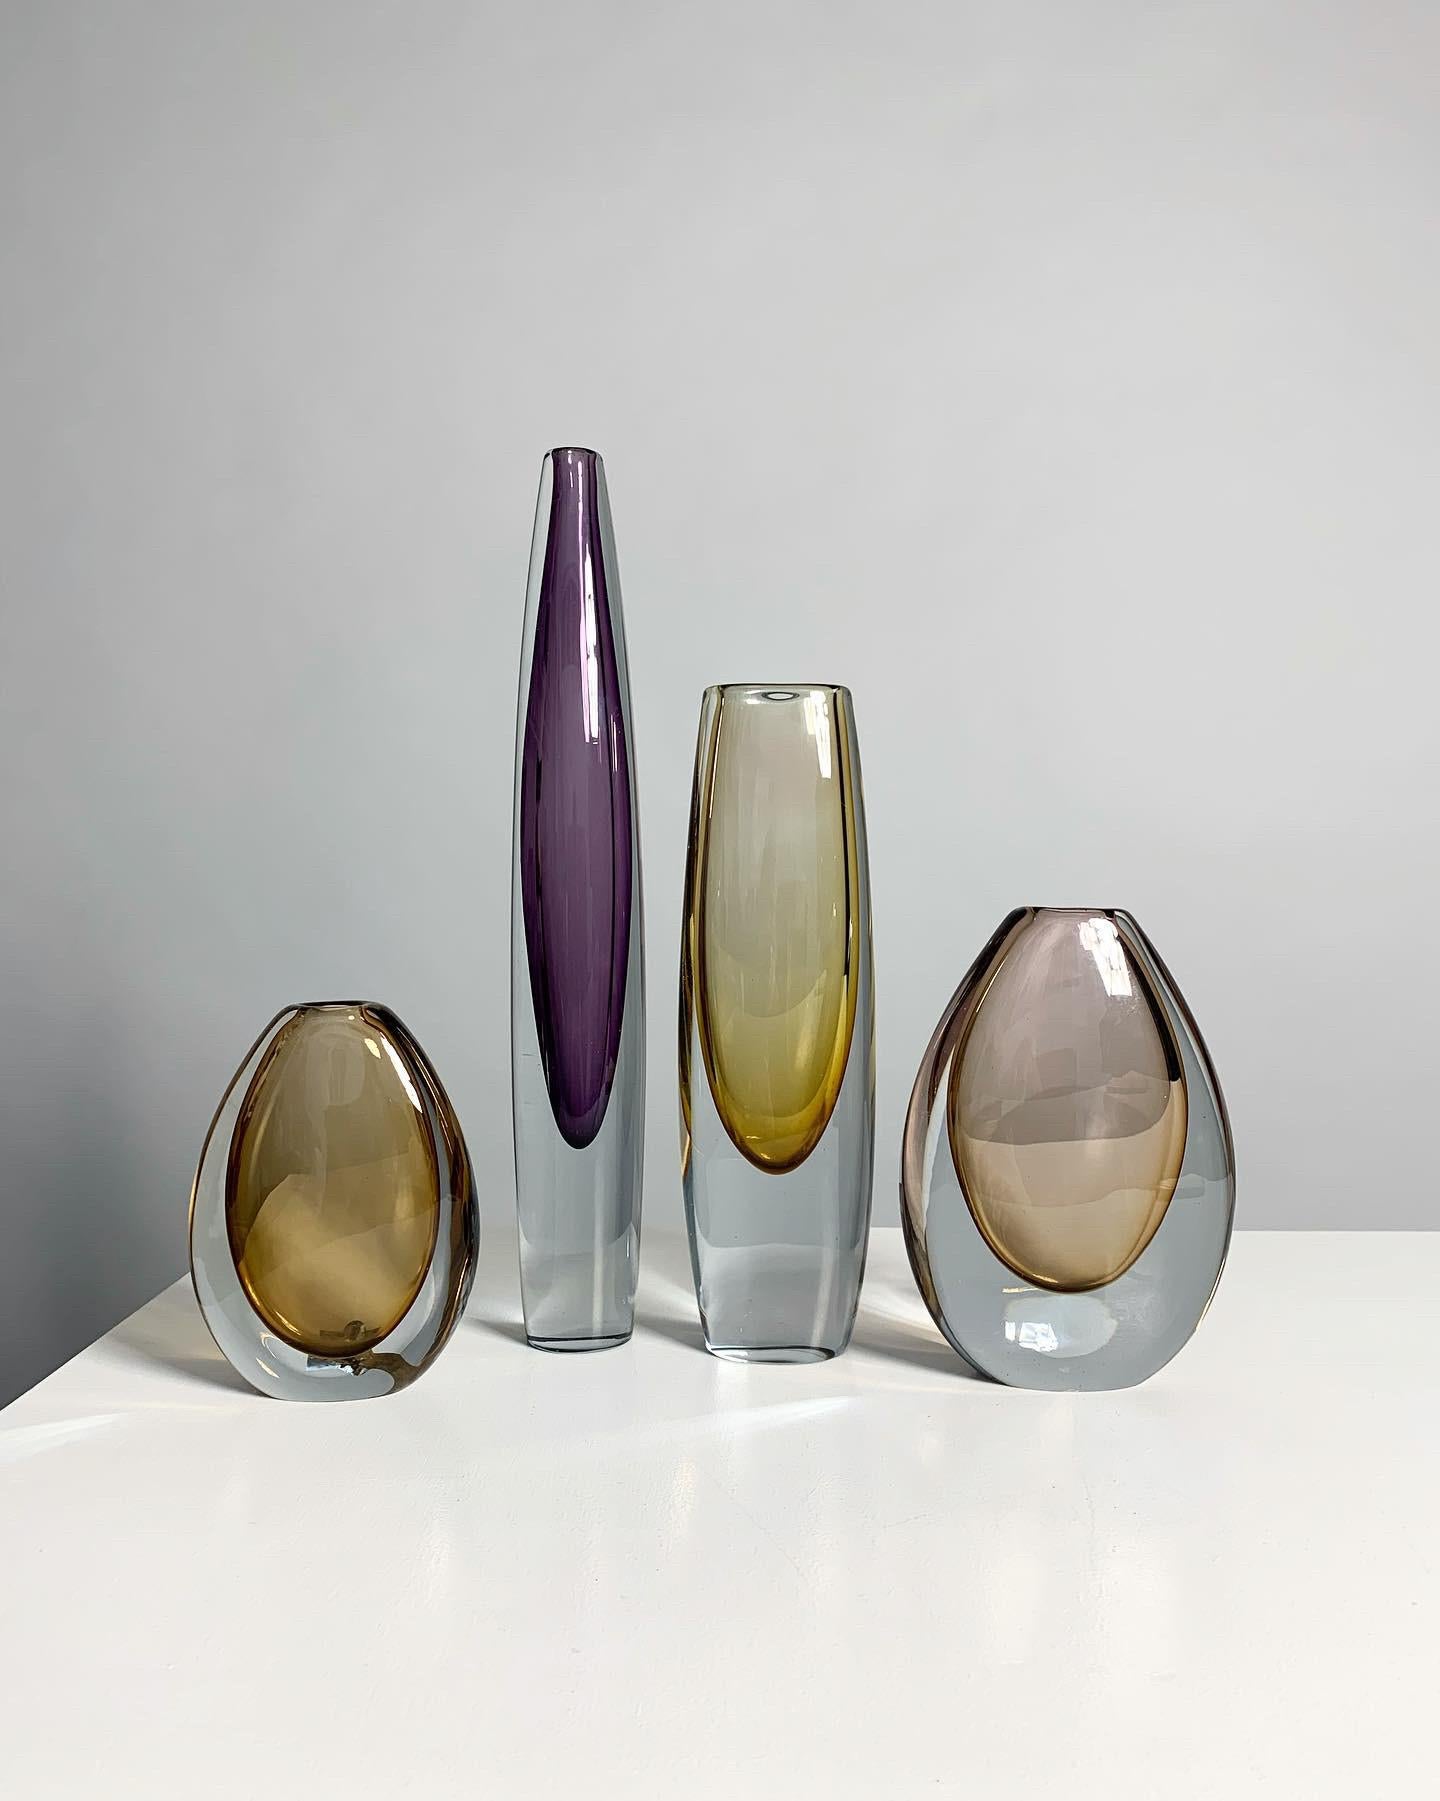 Set of four Gunnar Nylund & Asta Strömberg vases in colored and clear crystal for Strömbergshyttan, Sweden 1960s.

This listing contains the set of four shown in first photo, left to right

• Amber colored, Gunnar Nylund, h: 14.5 cm, signed

•